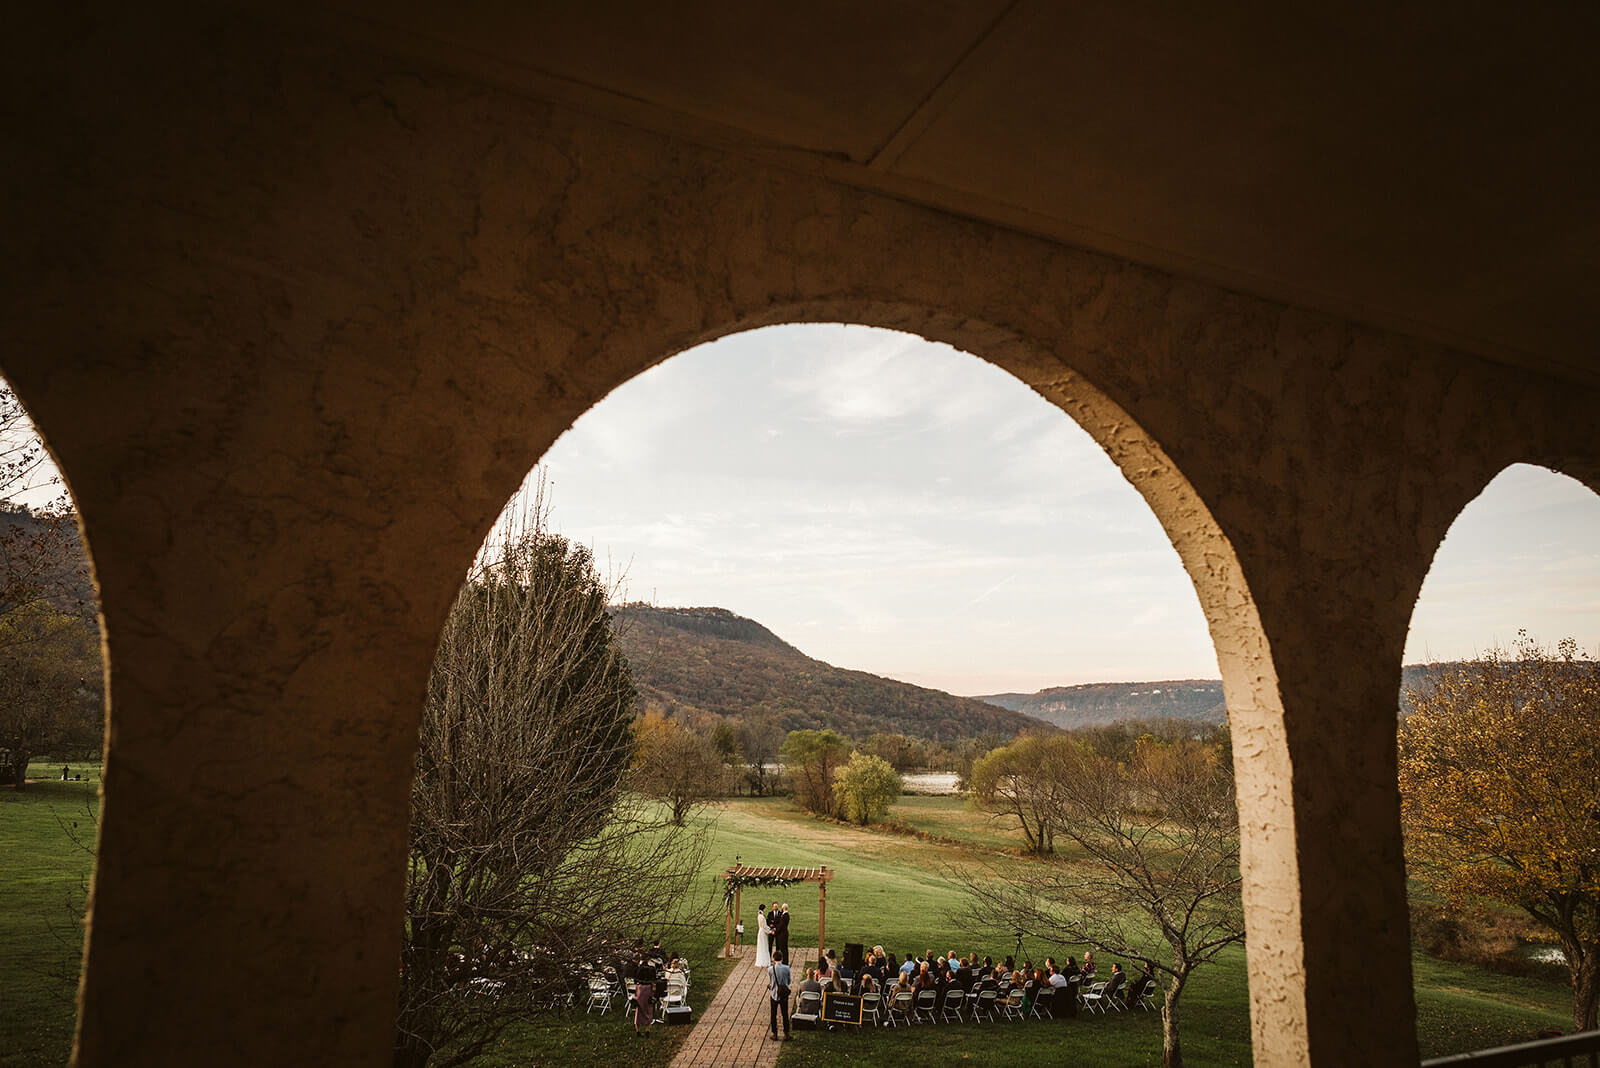 A shot through a Spaniish-style arch of a bride and groom exchanging vows in a field next to a river.